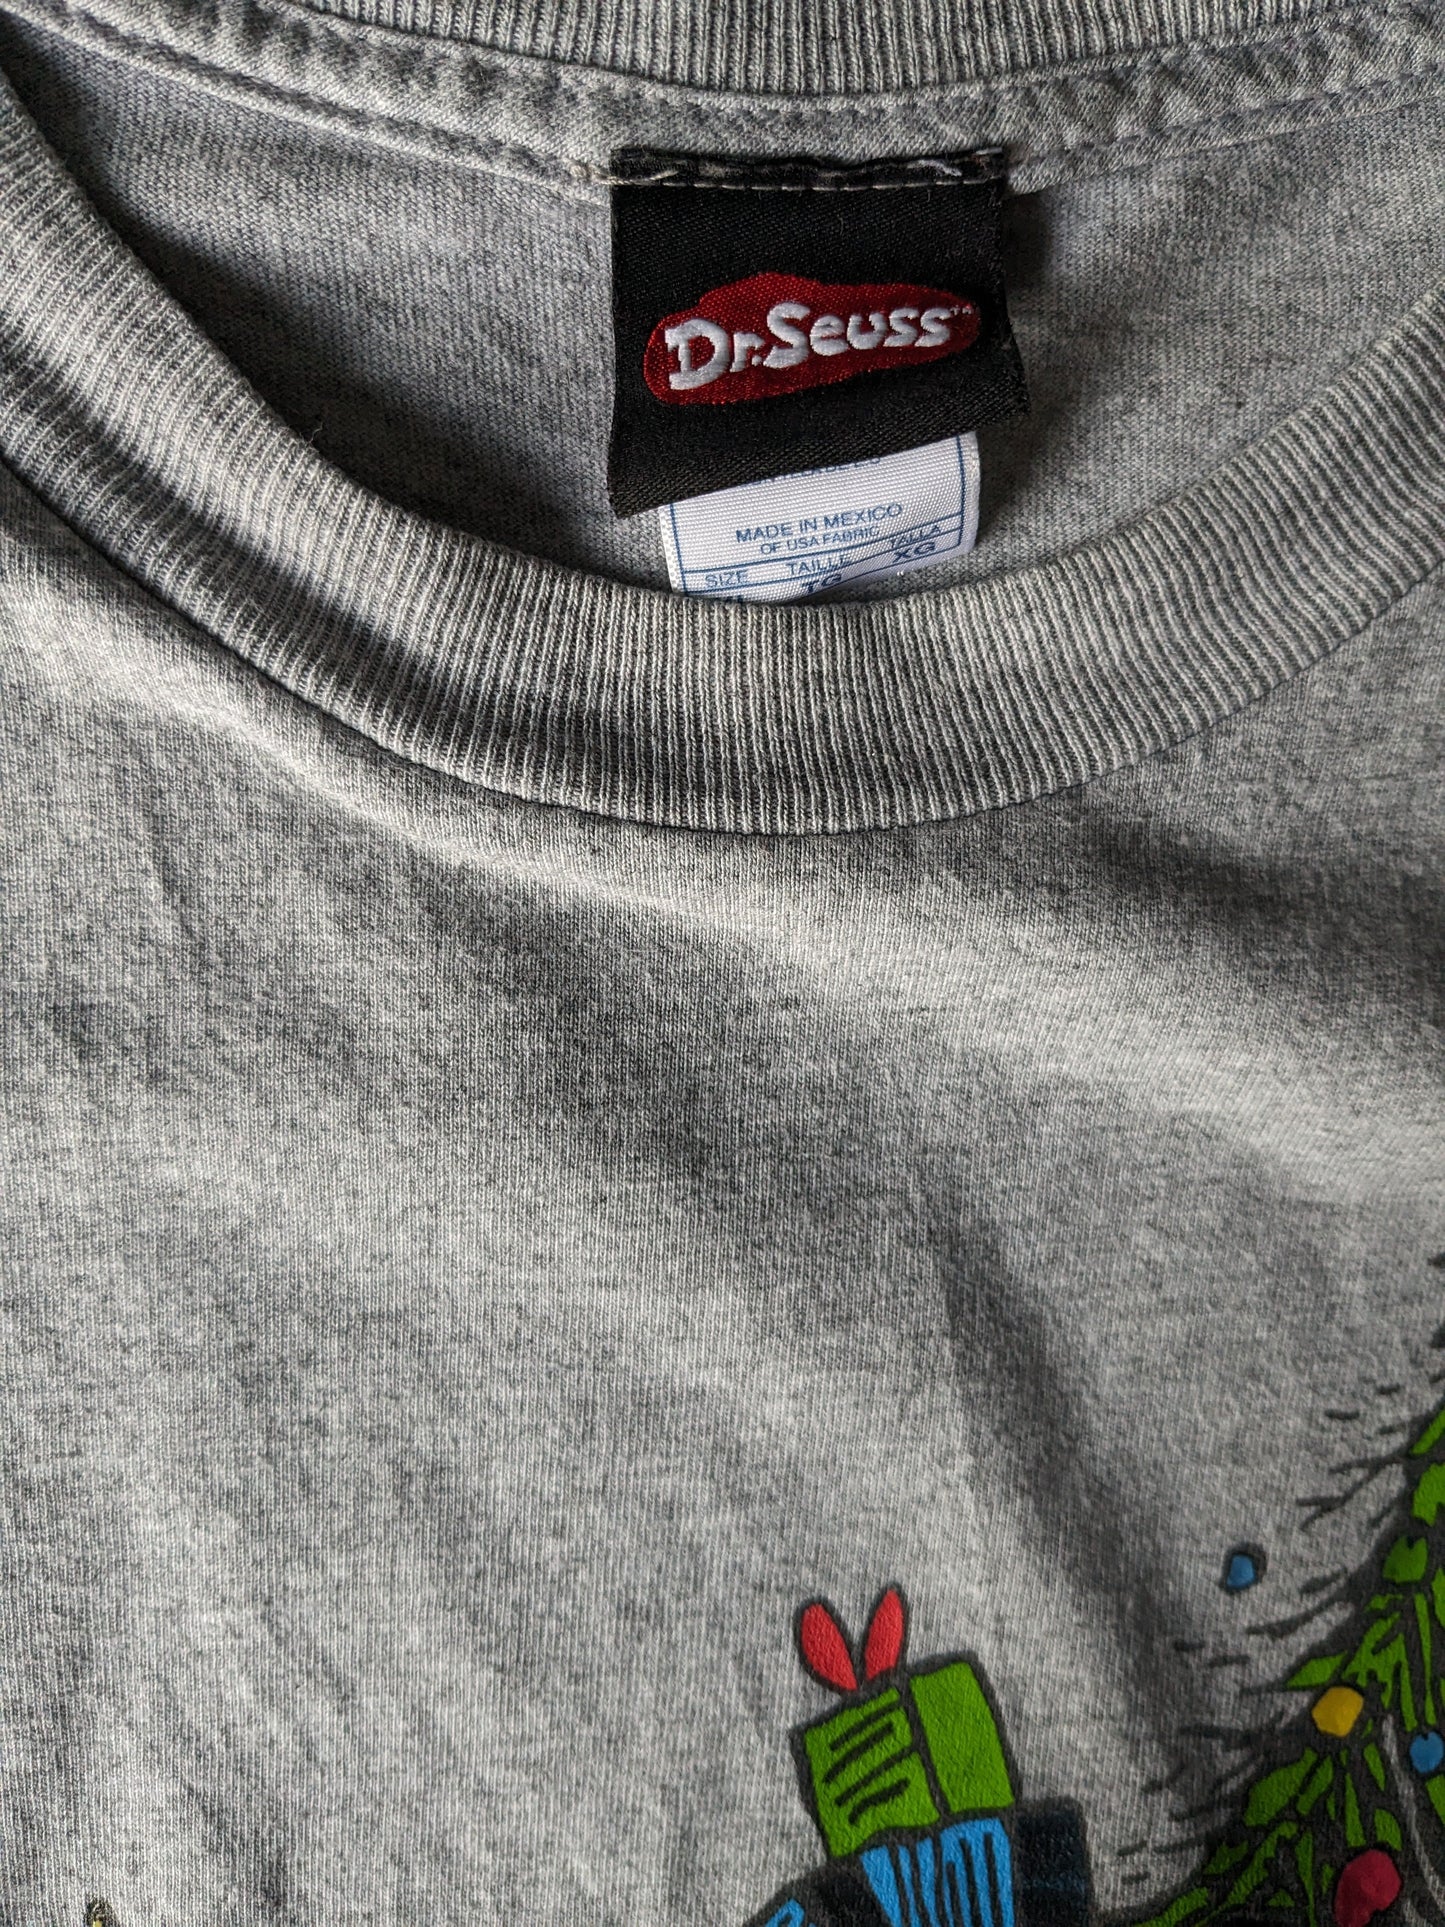 Dr. Seuss the Grinch Xmas shirt. Gray with print front and back. Size XL.